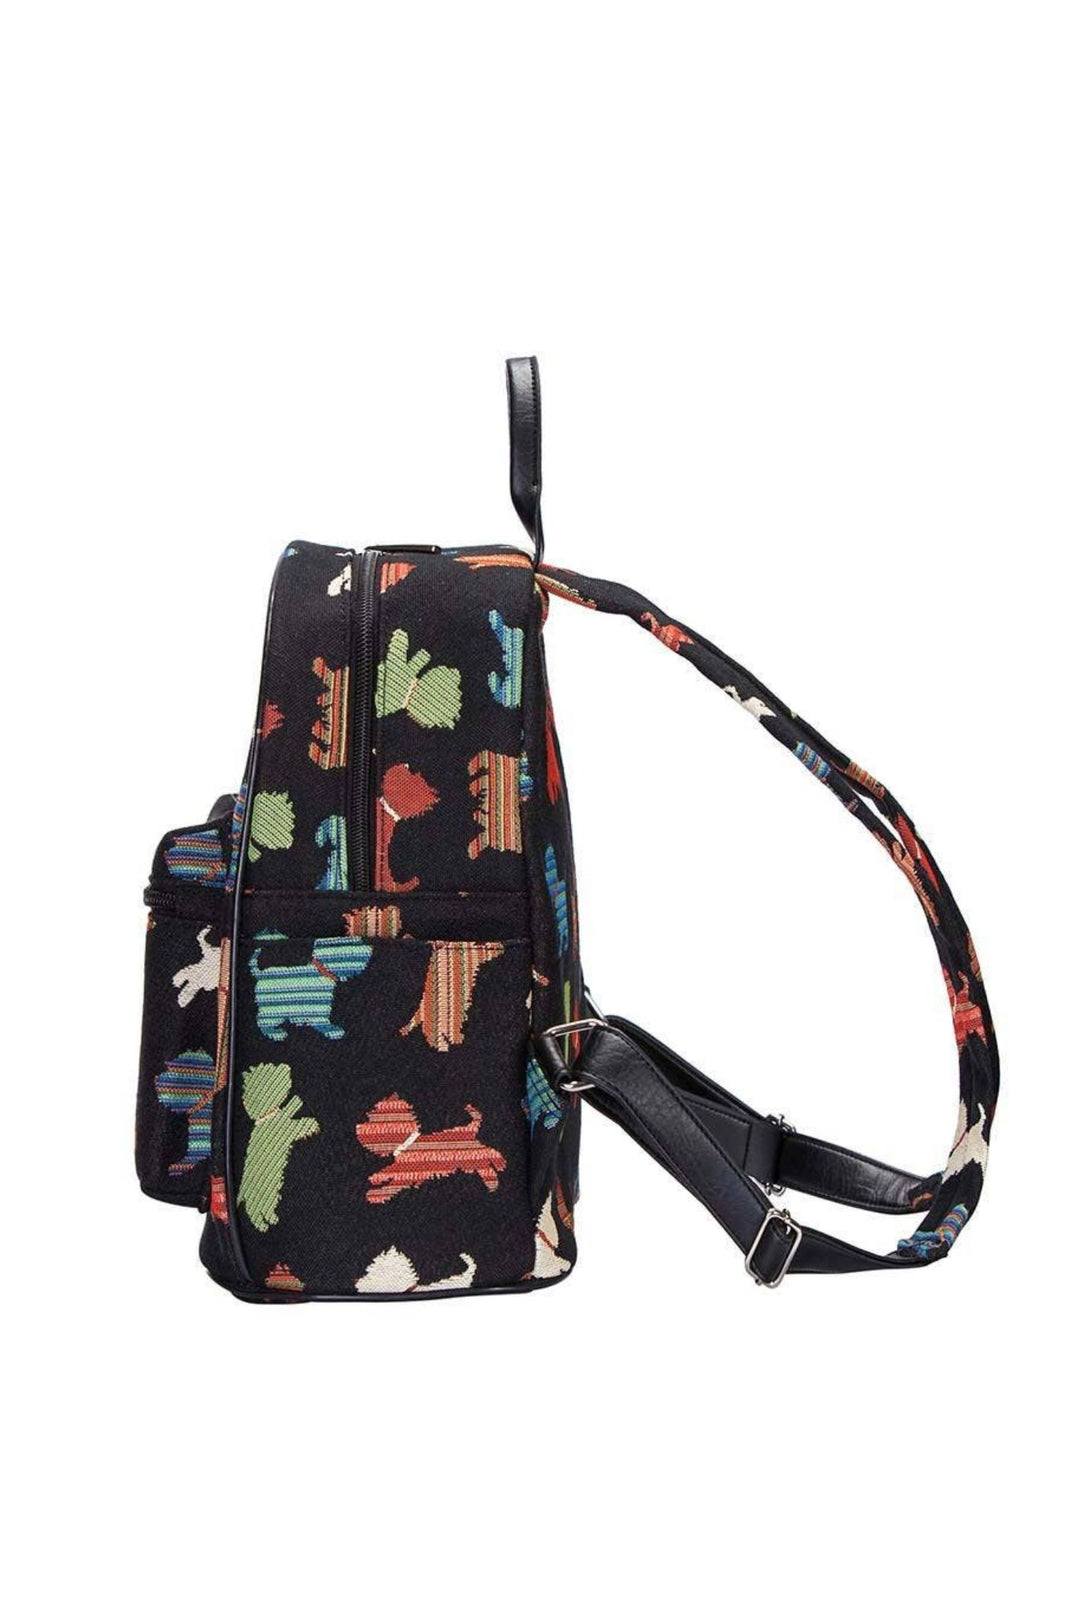 Multi-coloured Playful Puppy Daypack